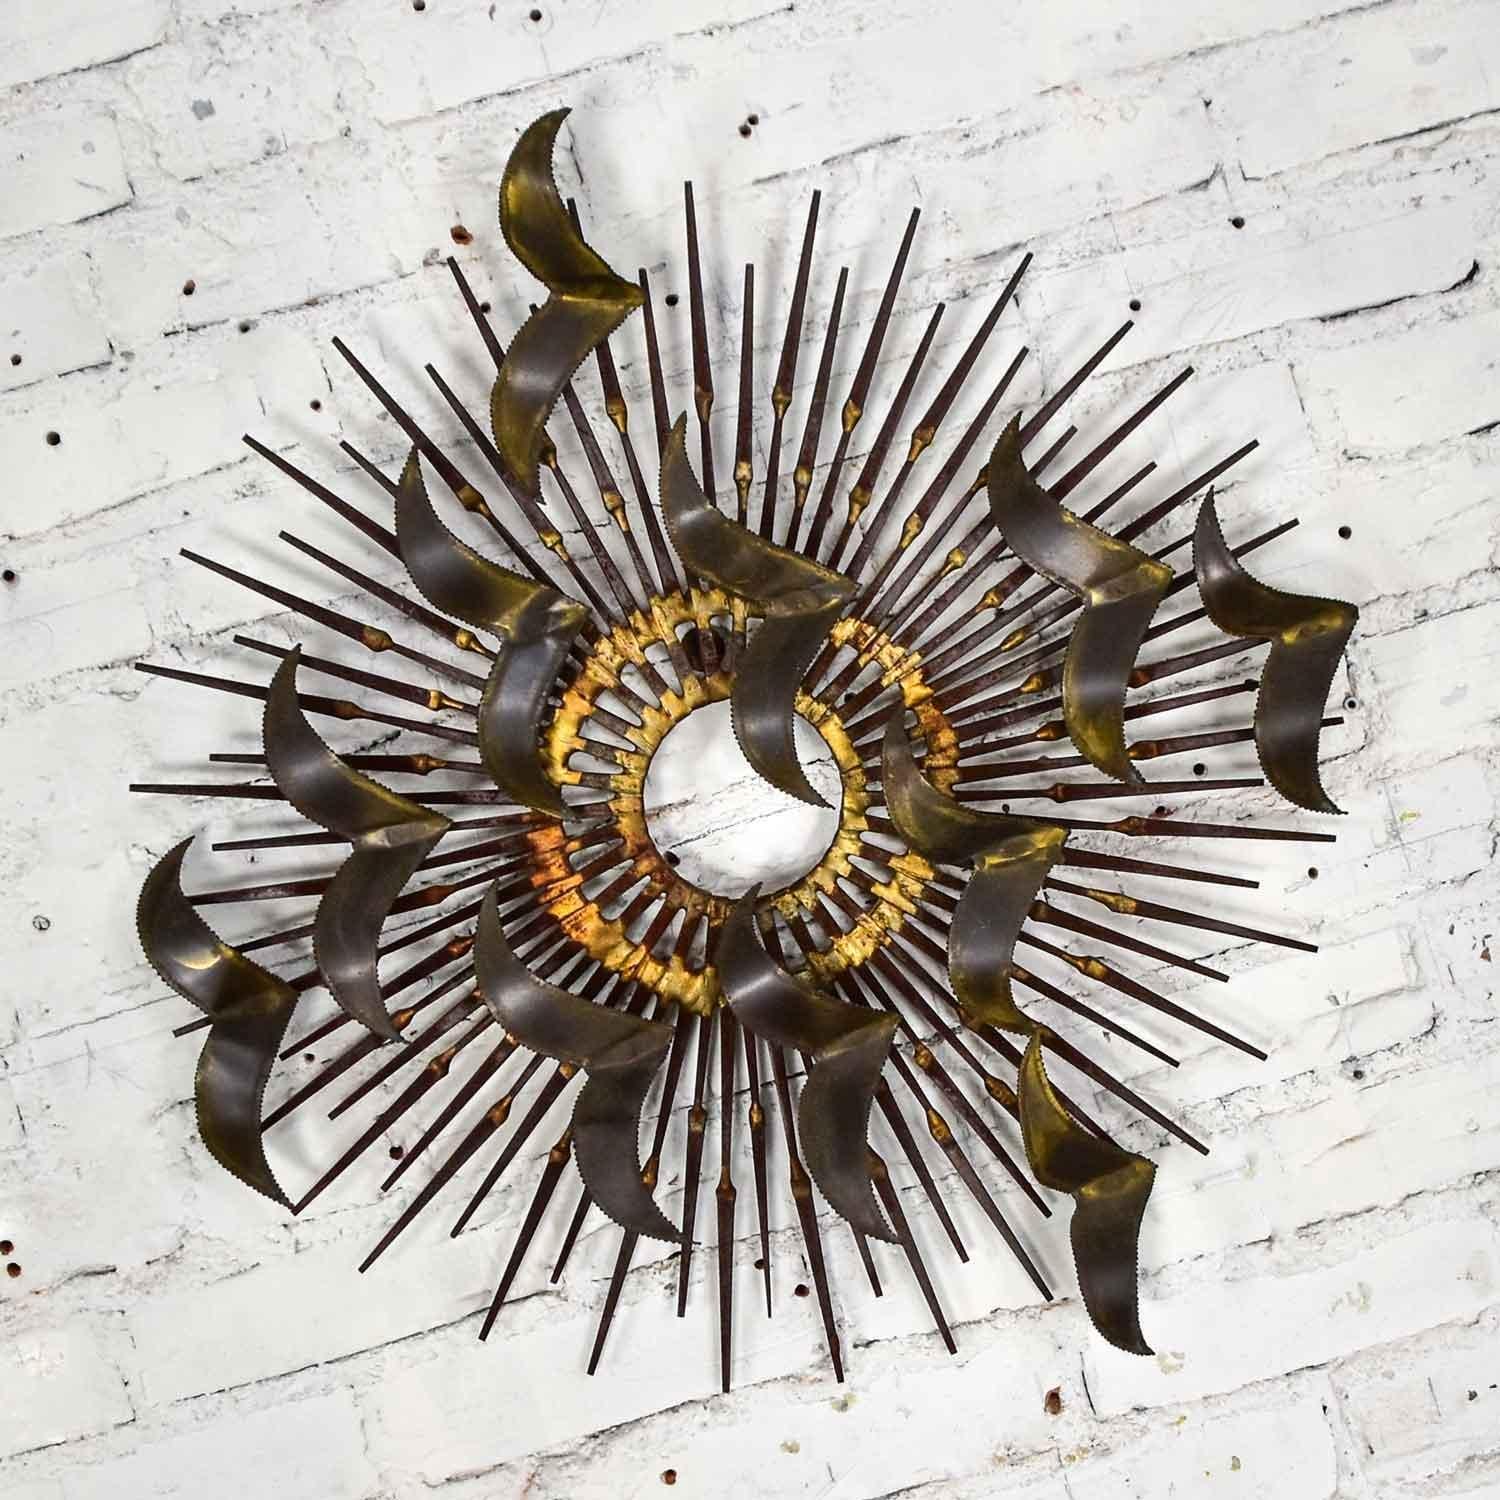 Fabulous torch cut brass birds on a horseshoe nail starburst wall art sculpture in the style of Silas Seandel or William Bowie. Comprised of horseshoe nails, brass, and brass braising. Gorgeous vintage condition with normal wear for age. The finish